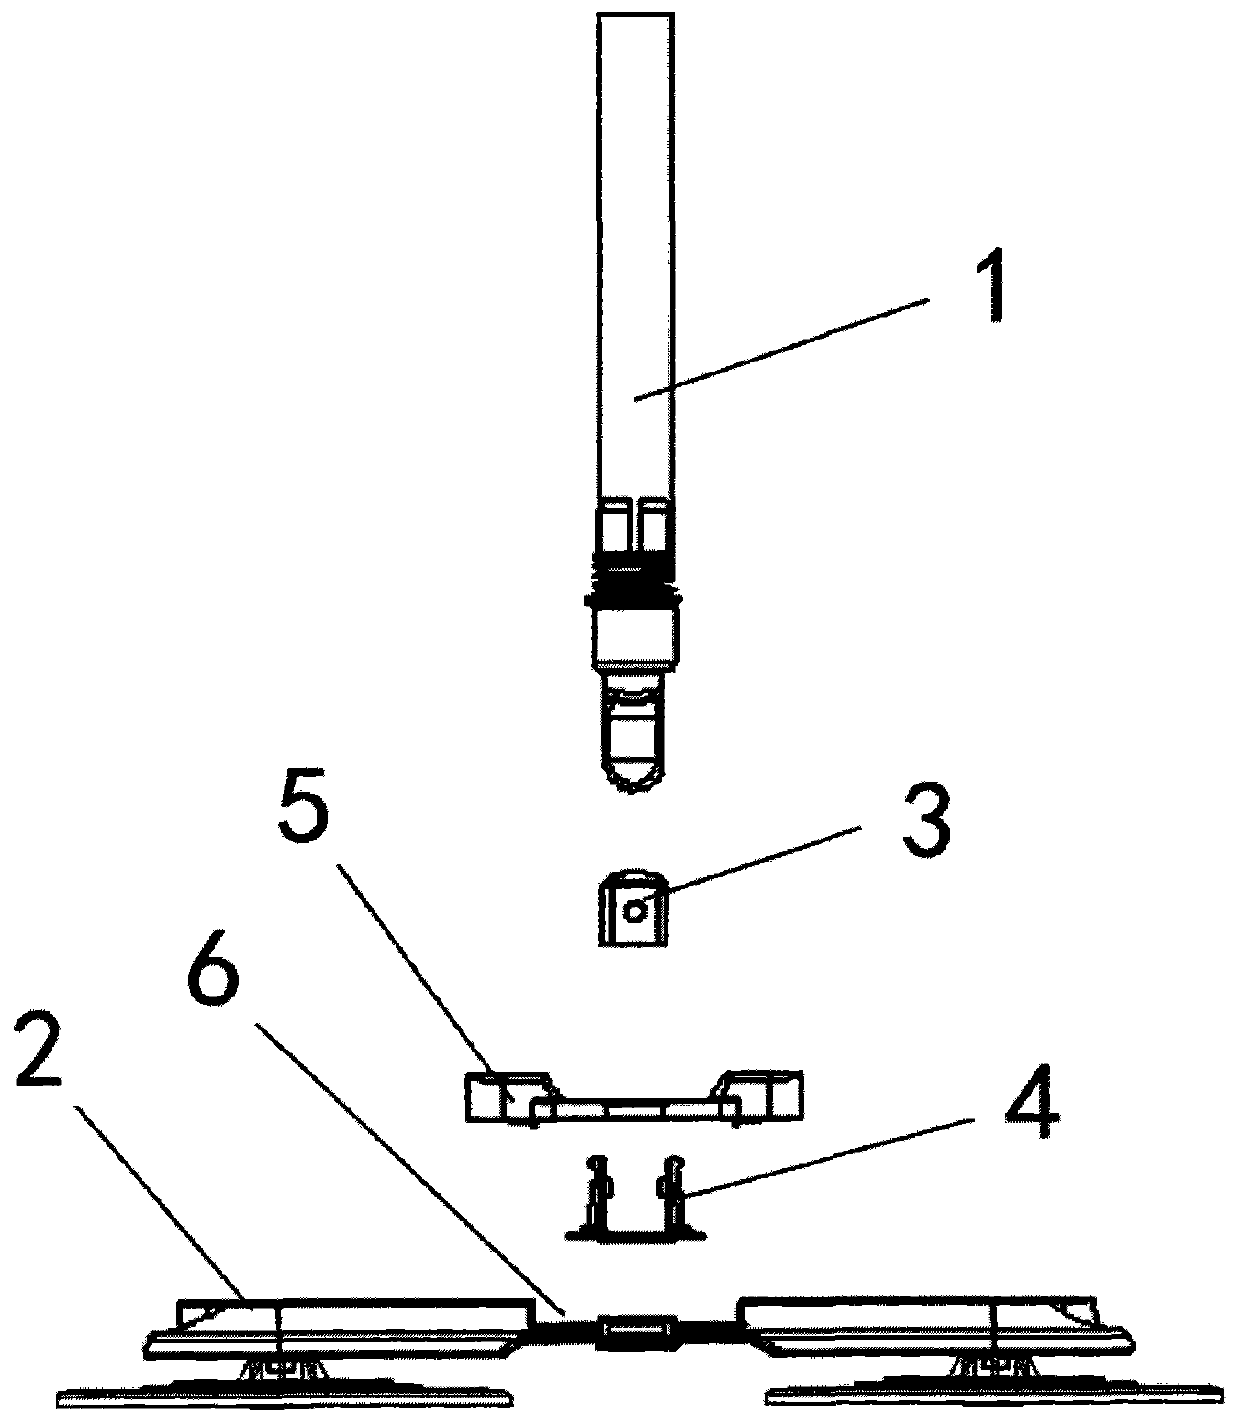 Double-head hand-pressing rotating mop capable of facilitating control of rotation of dewatering basket